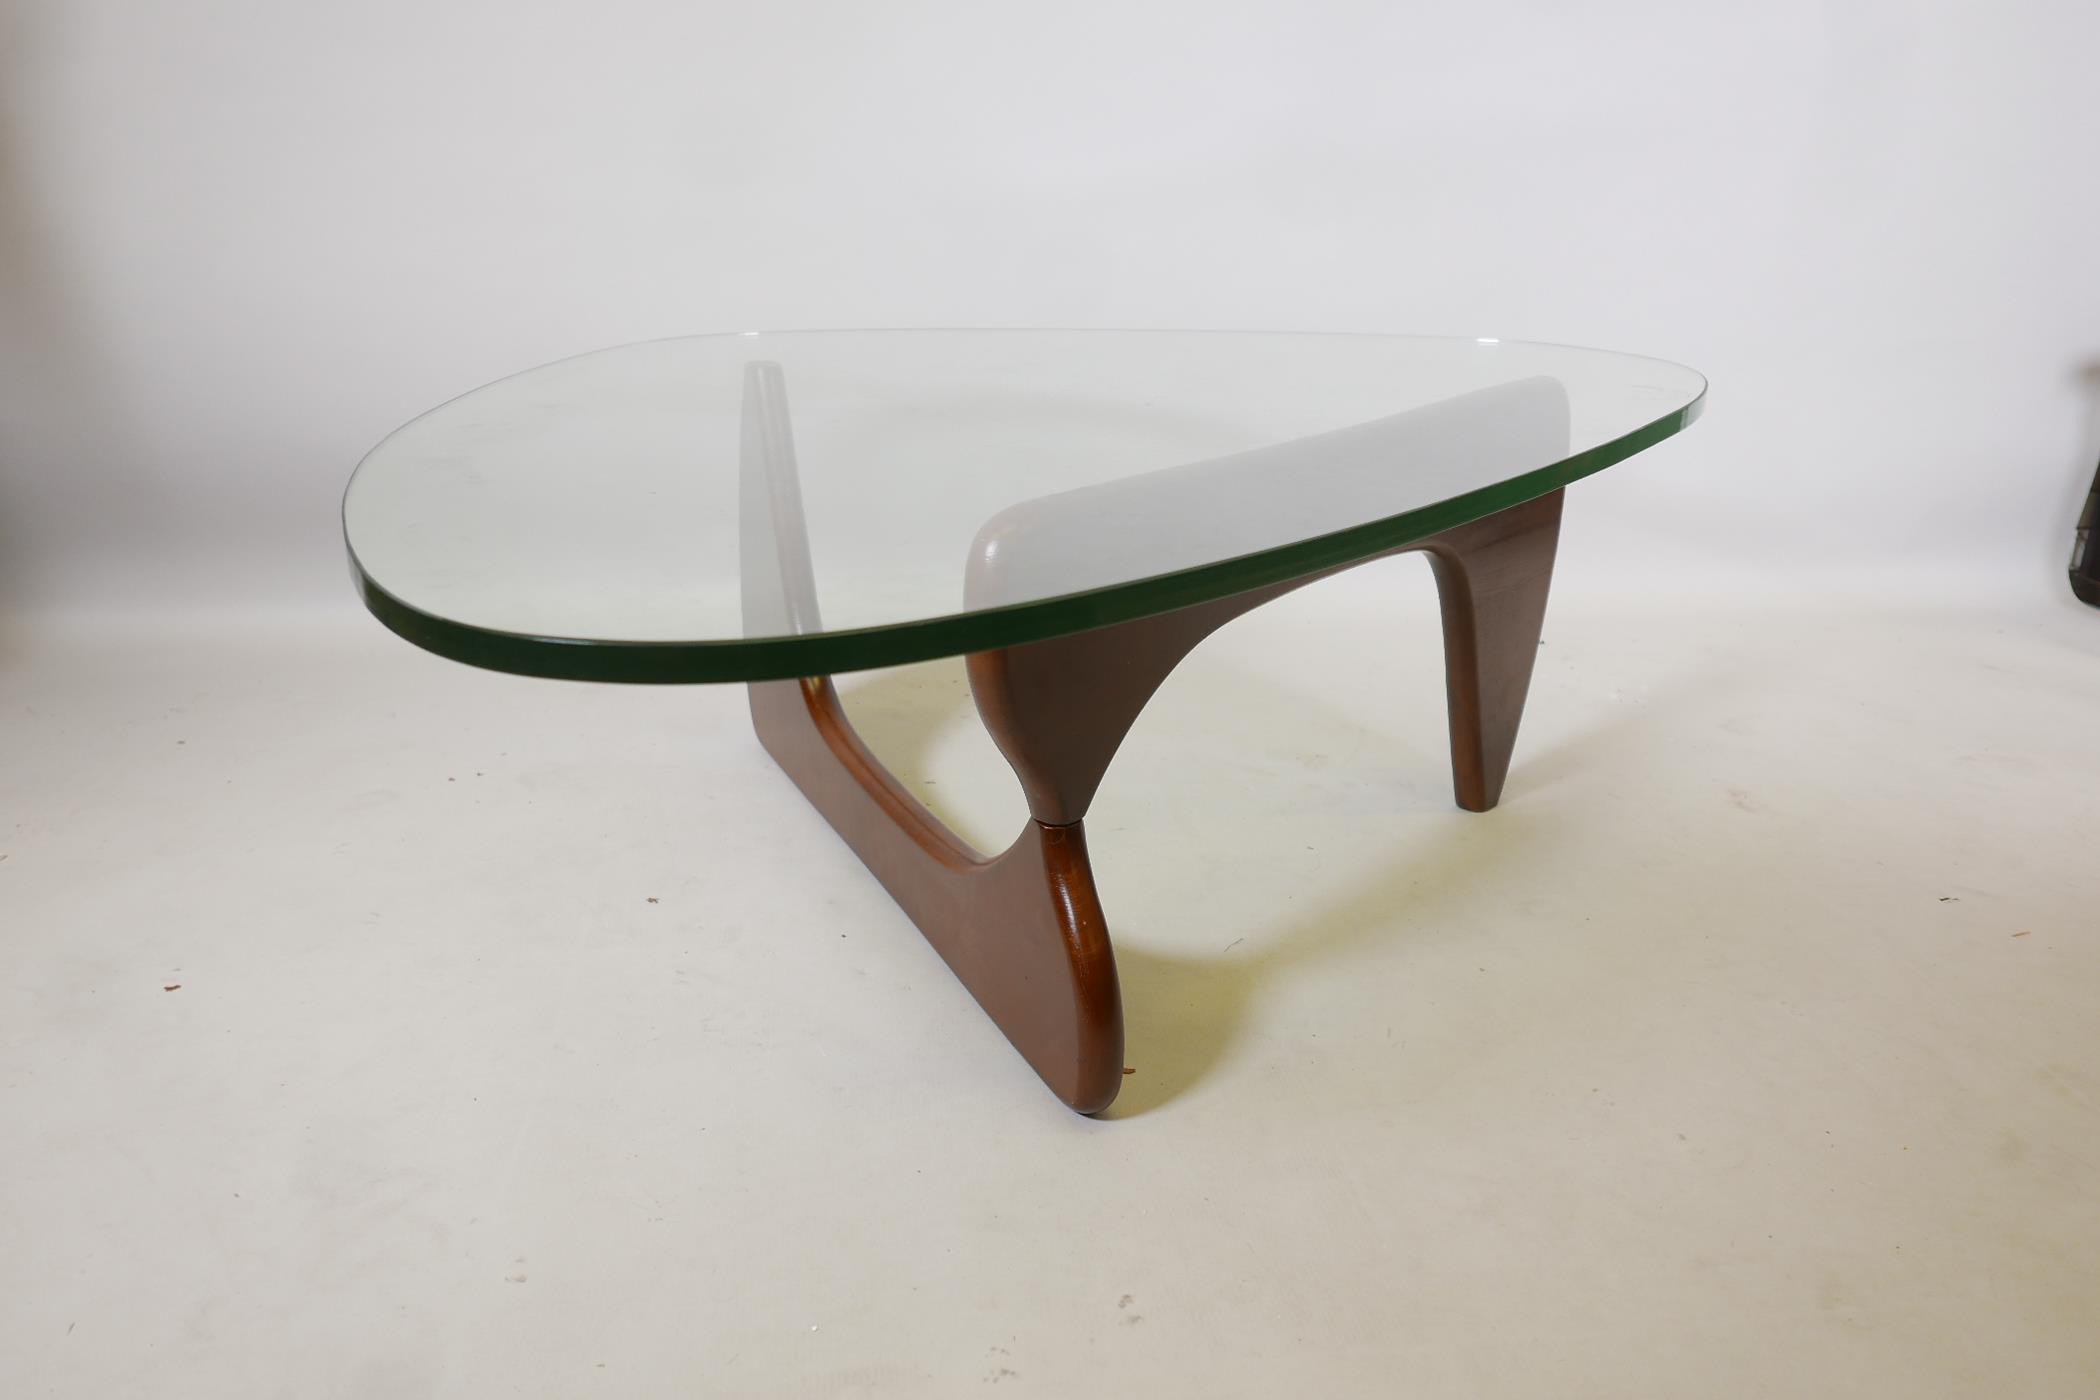 An Isamu Noguchi style pebble shaped coffee table with glass top, 50" x 37½", 16" high